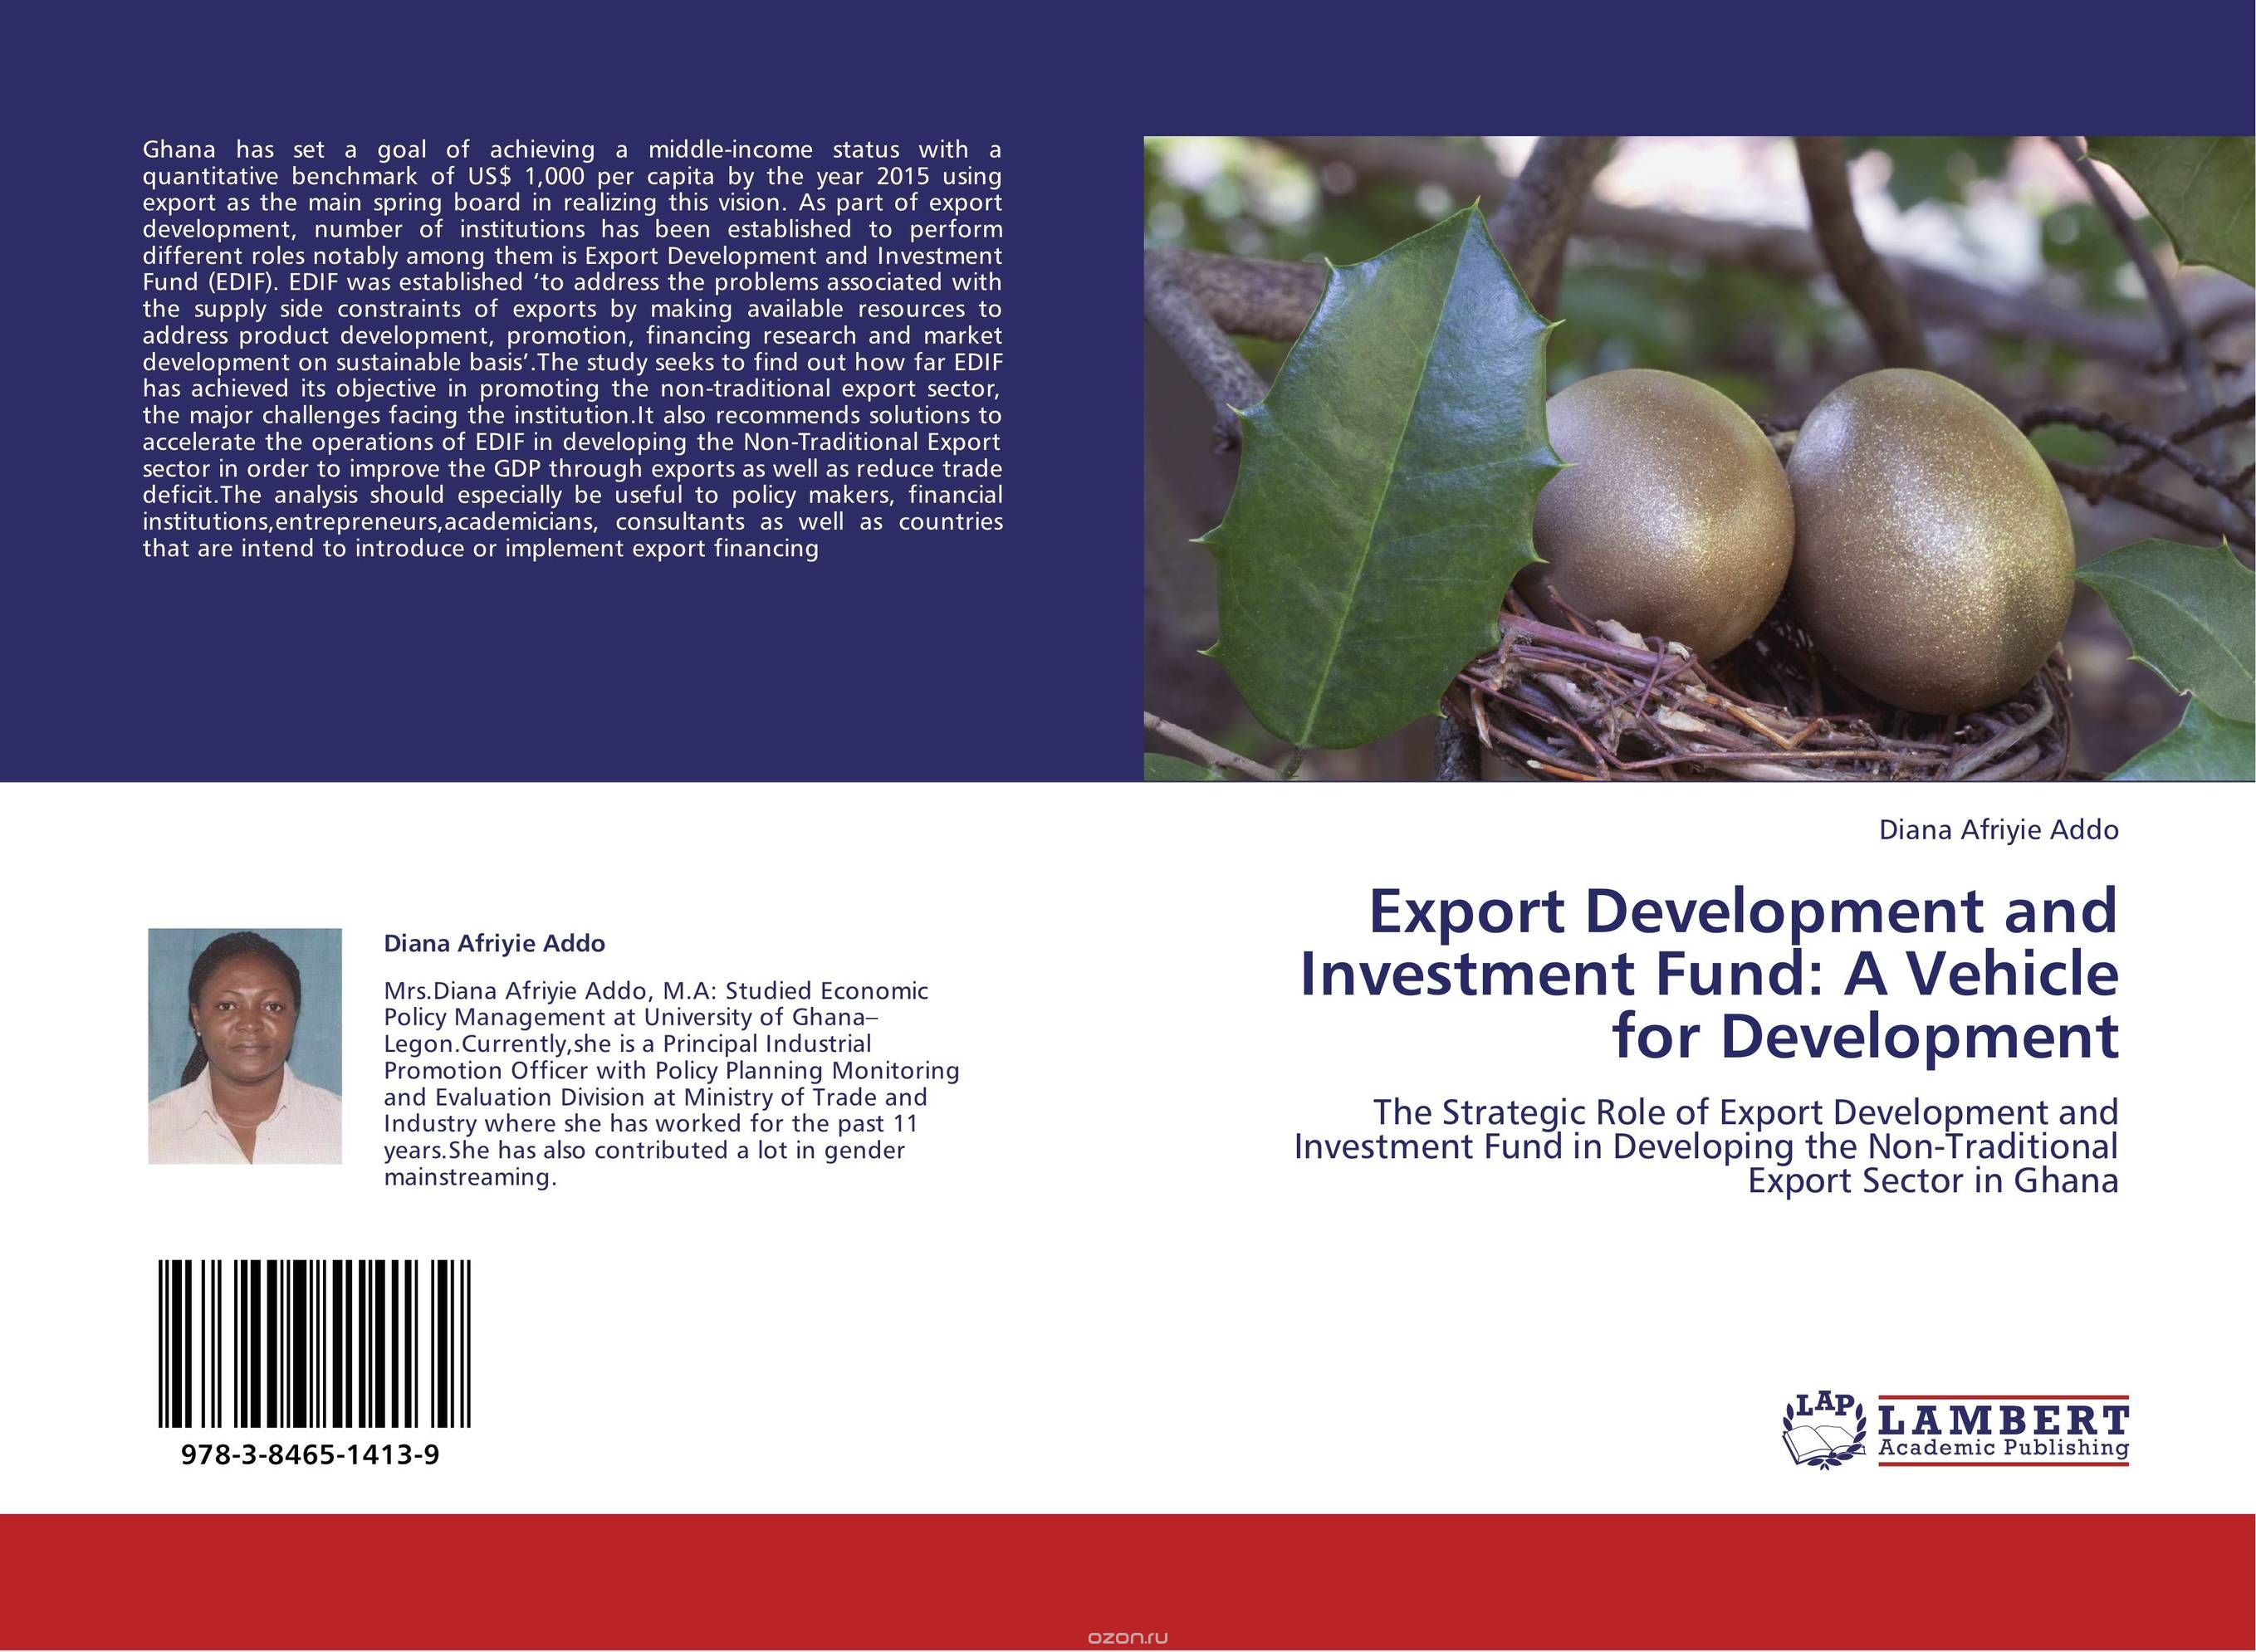 Export Development and Investment Fund: A Vehicle for Development